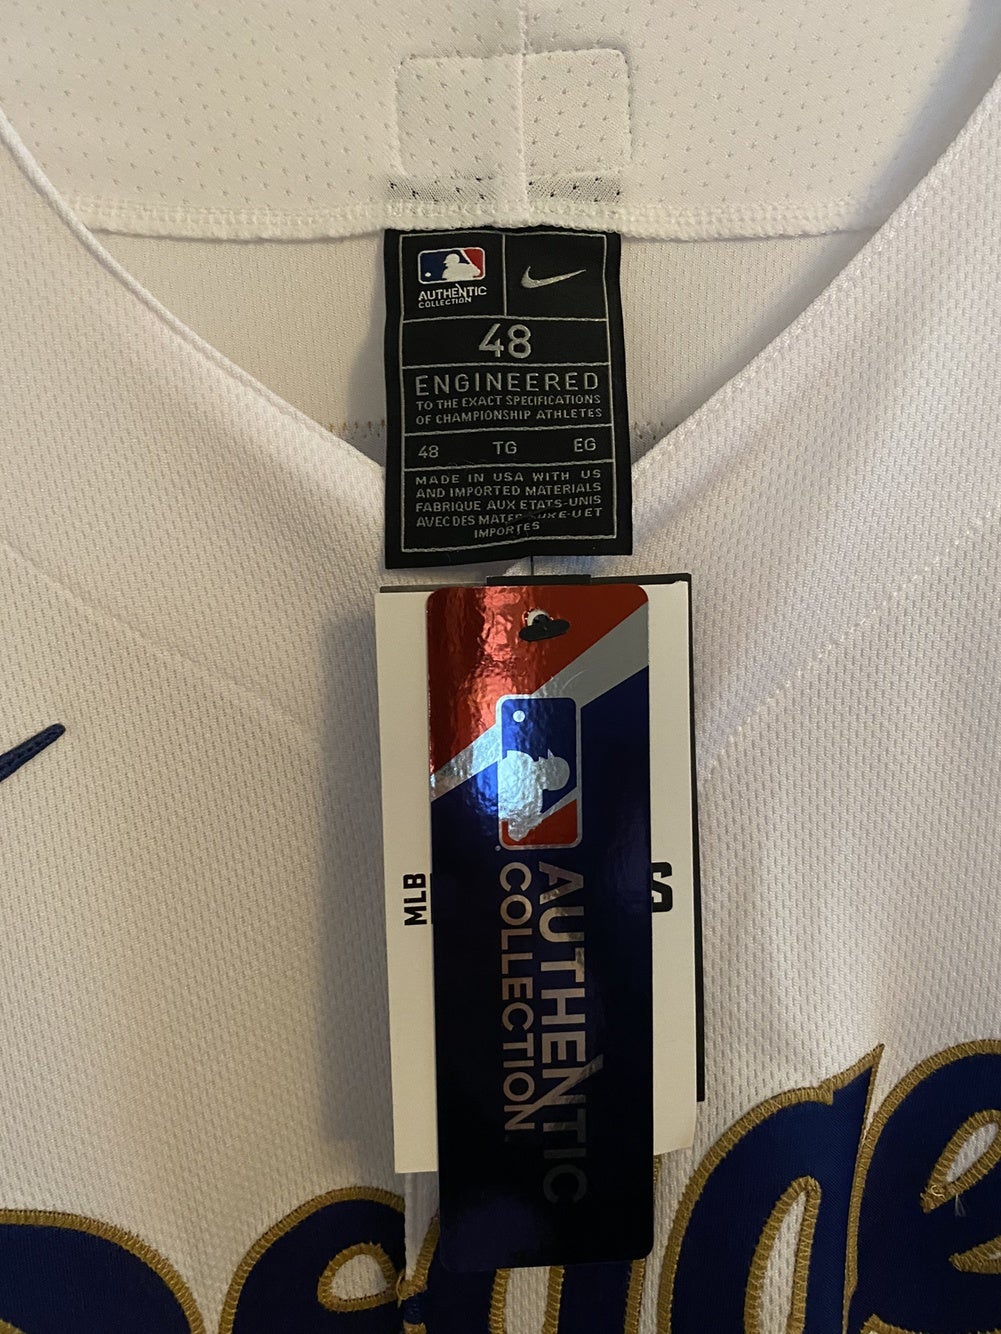 Corey Seager Authentic Game-Used Jersey from 8/16/20 Game vs LAA - Size 46